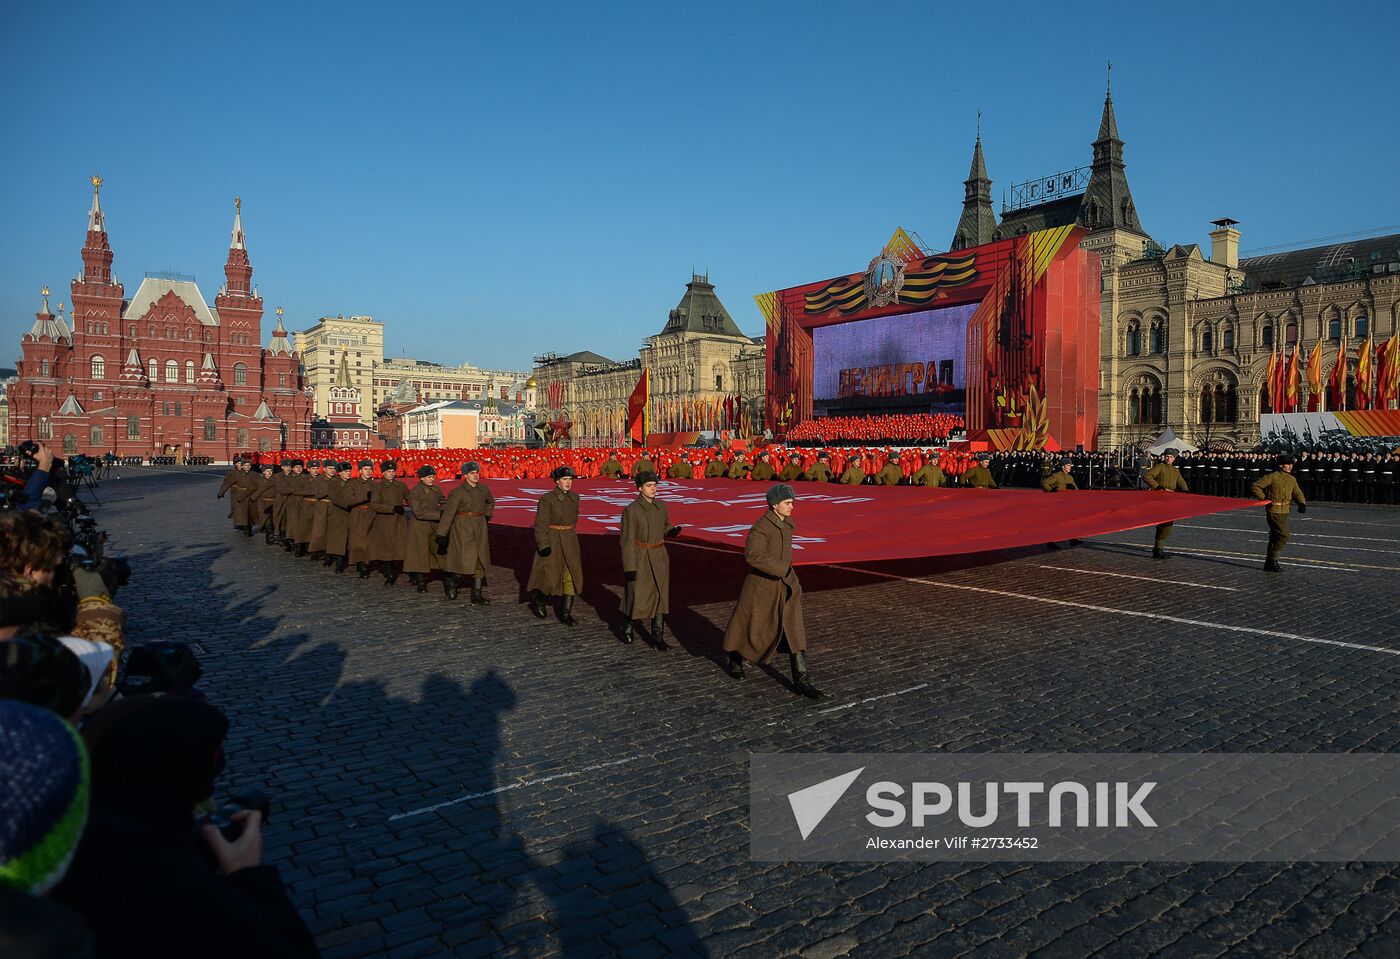 March to mark legendary 1941 military parade